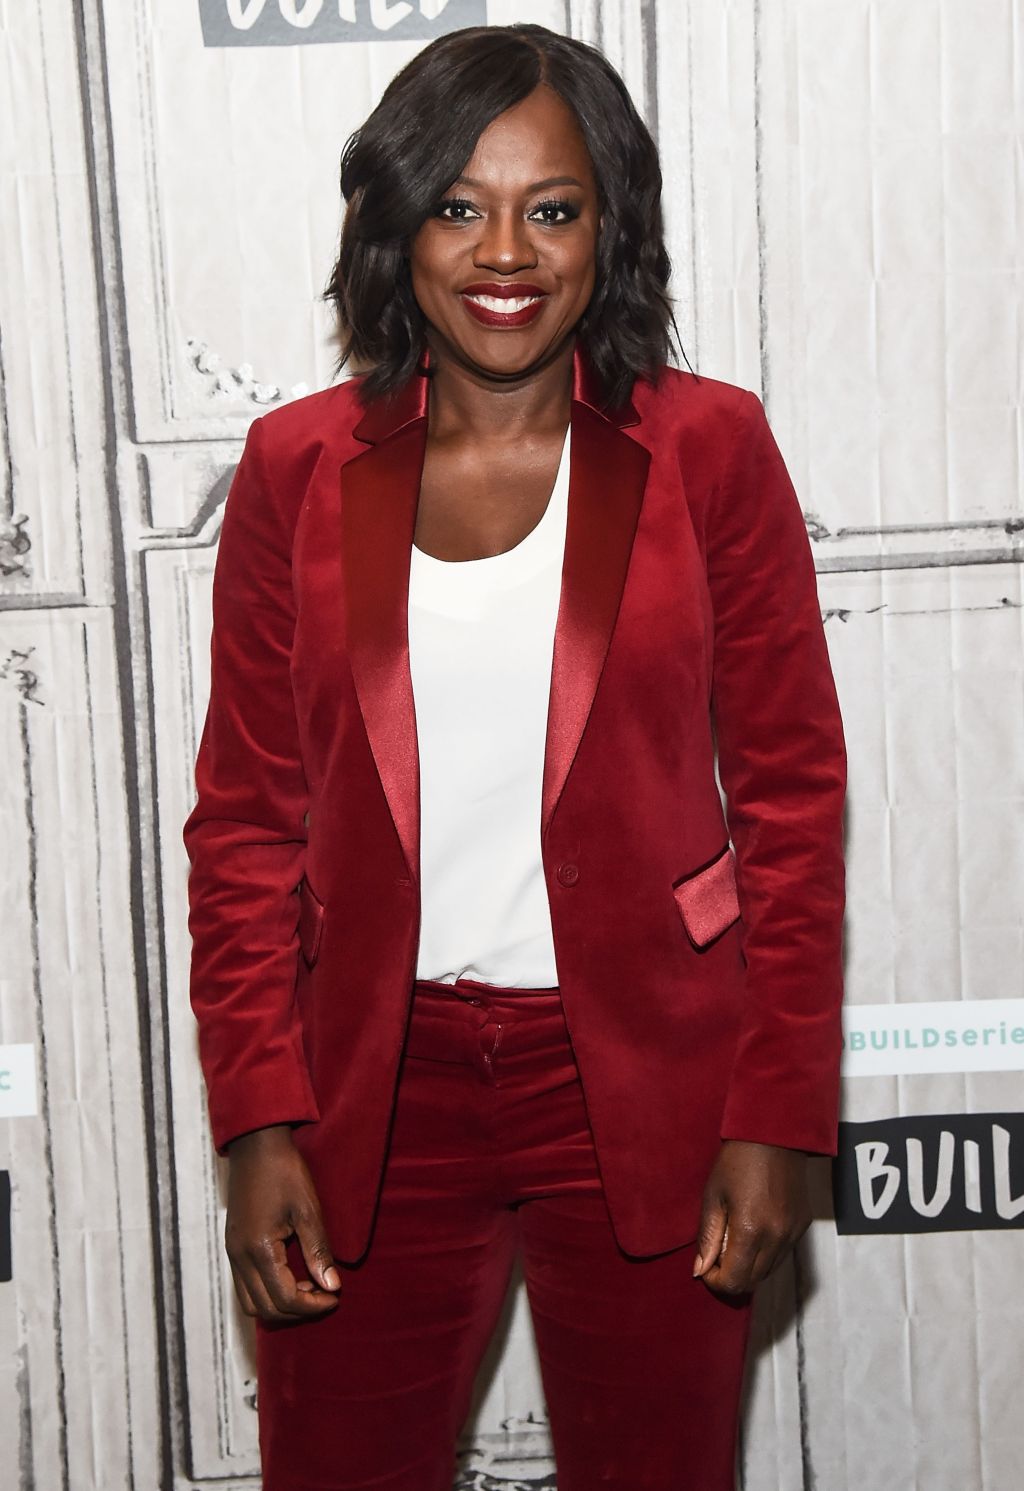 Build Series Presents Viola Davis Discussing 'How To Get Away With Murder'